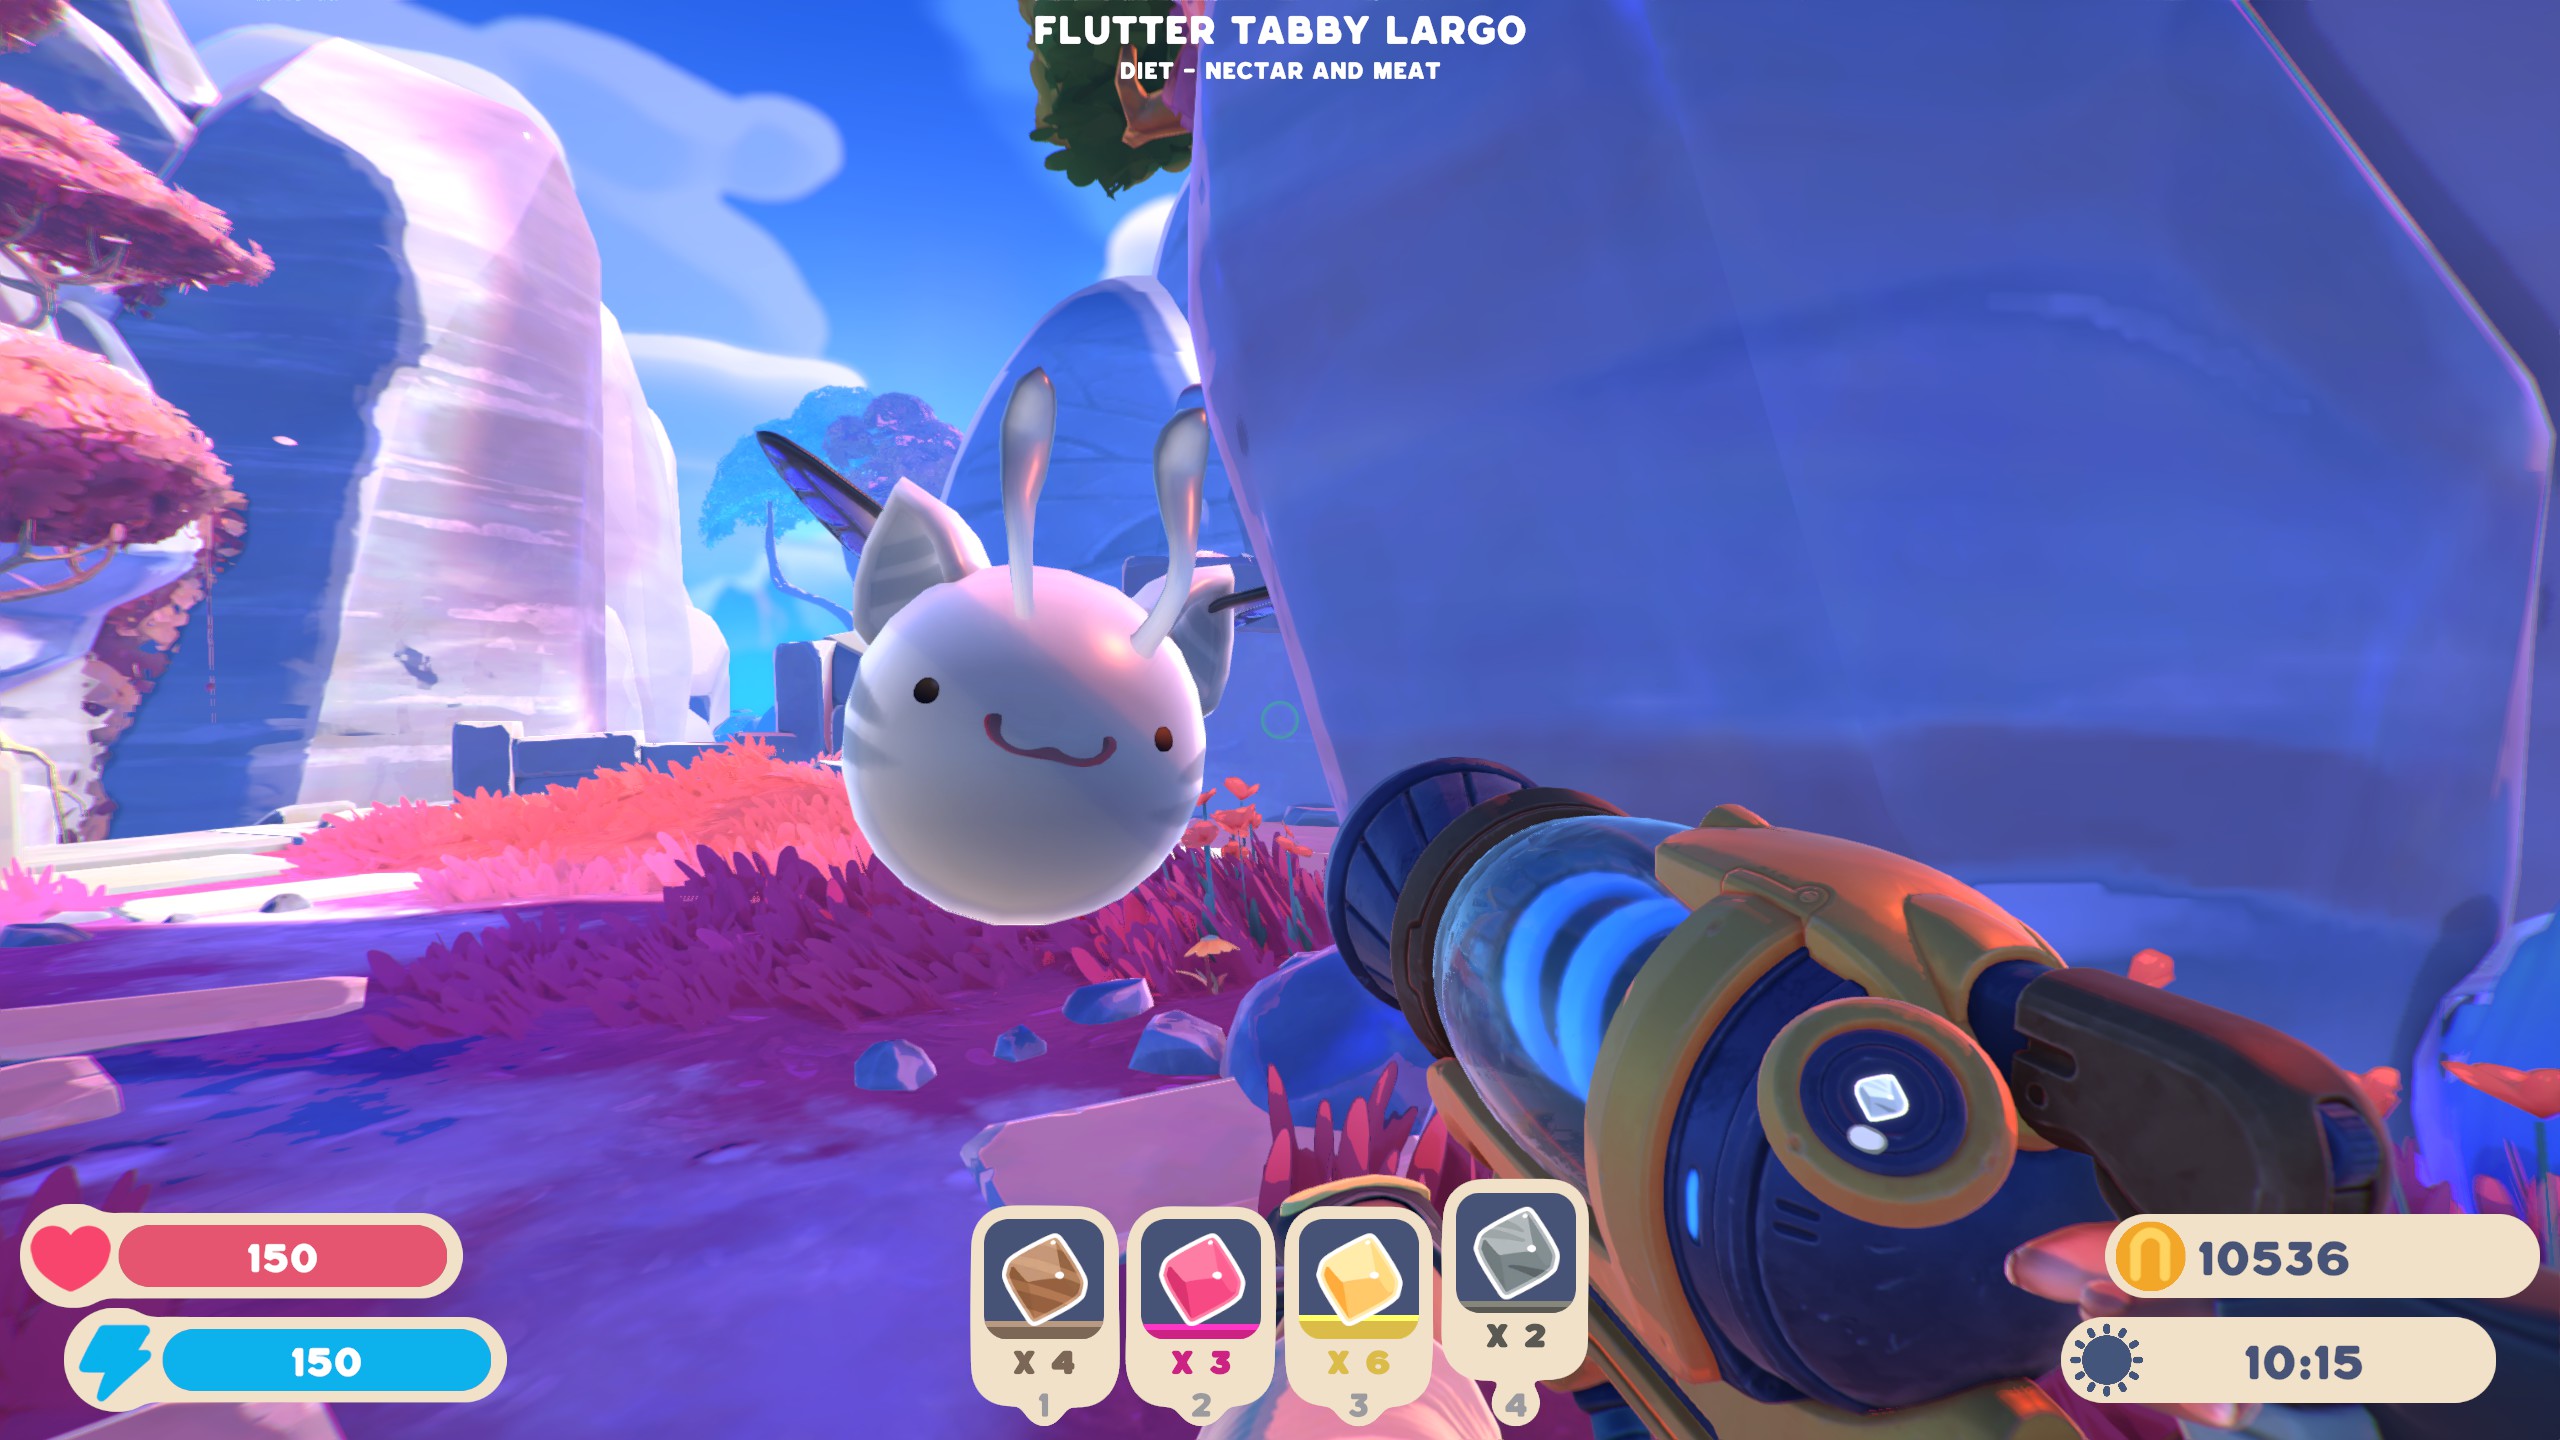 Slime Rancher 2 All Largo Slime Combinations - Tabby - 06DB4F2